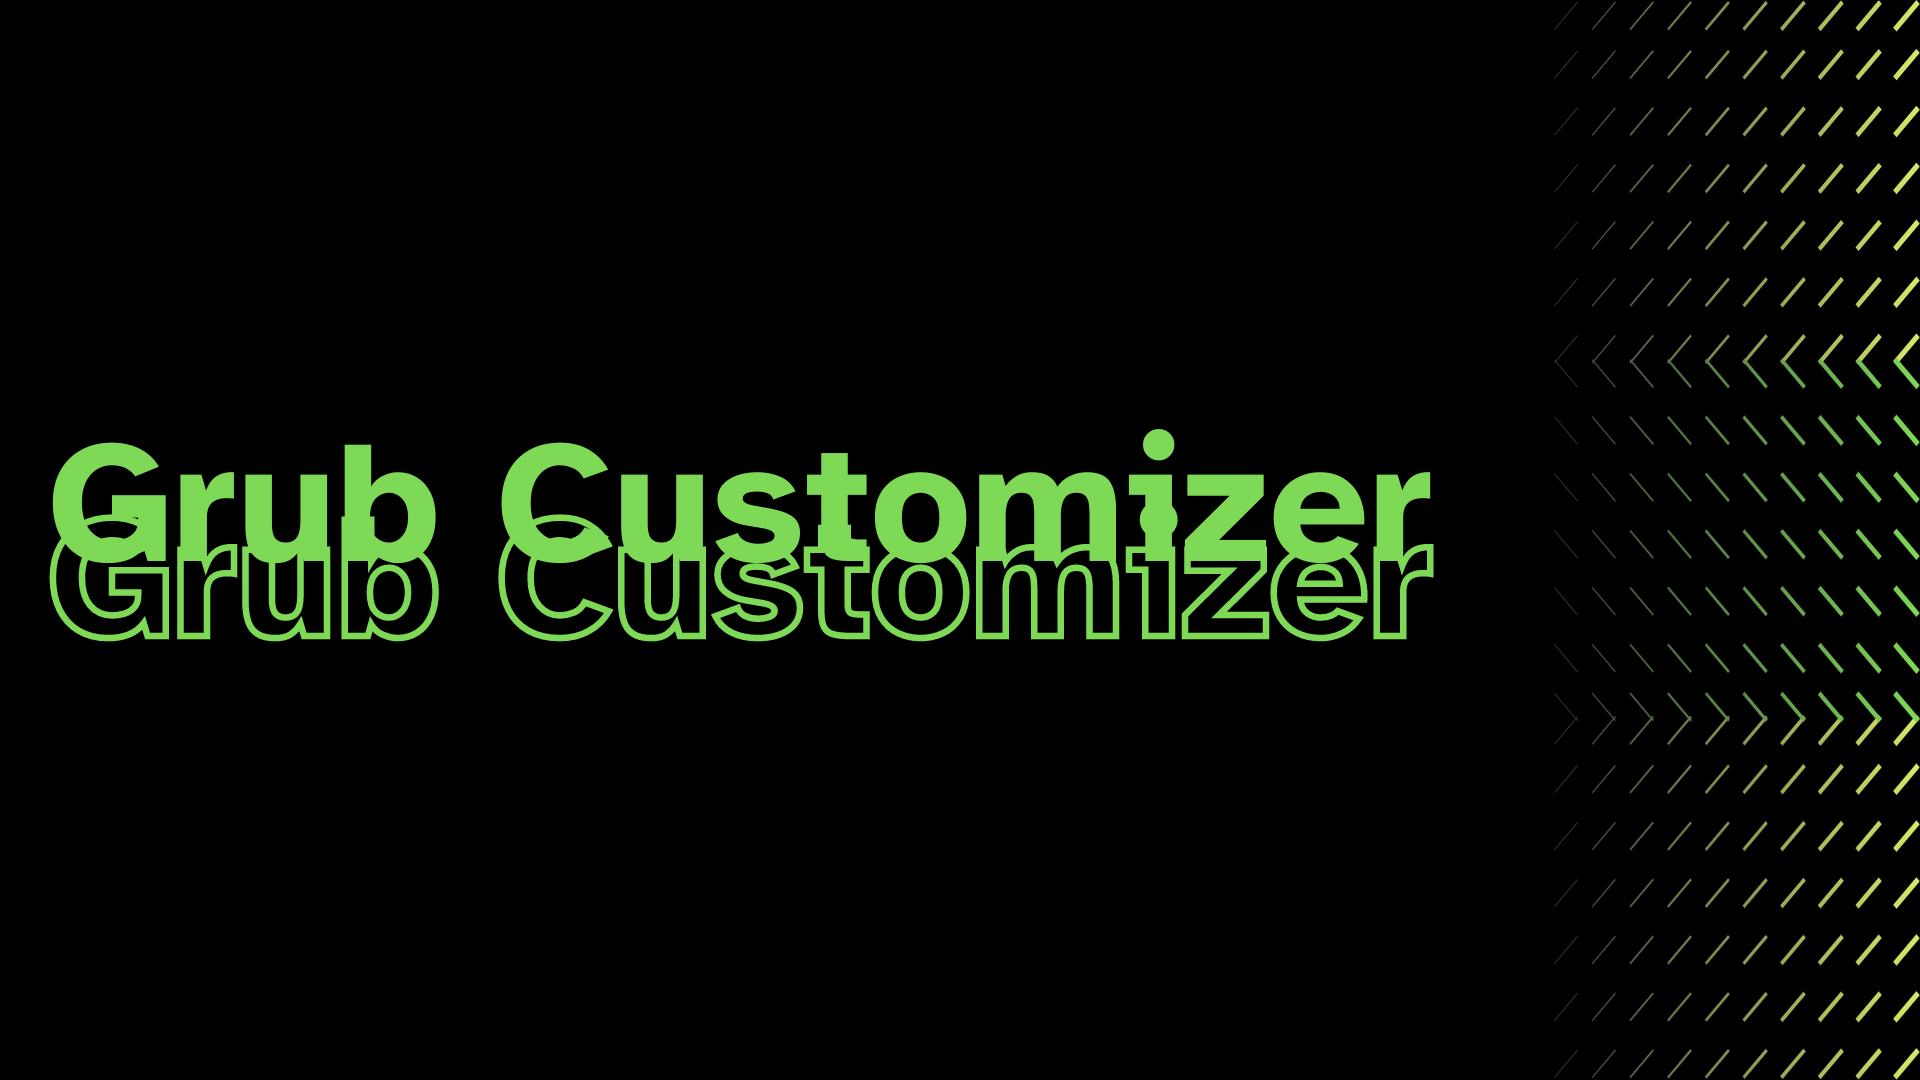 How to Install and Use Grub Customizer on Linux Mint?